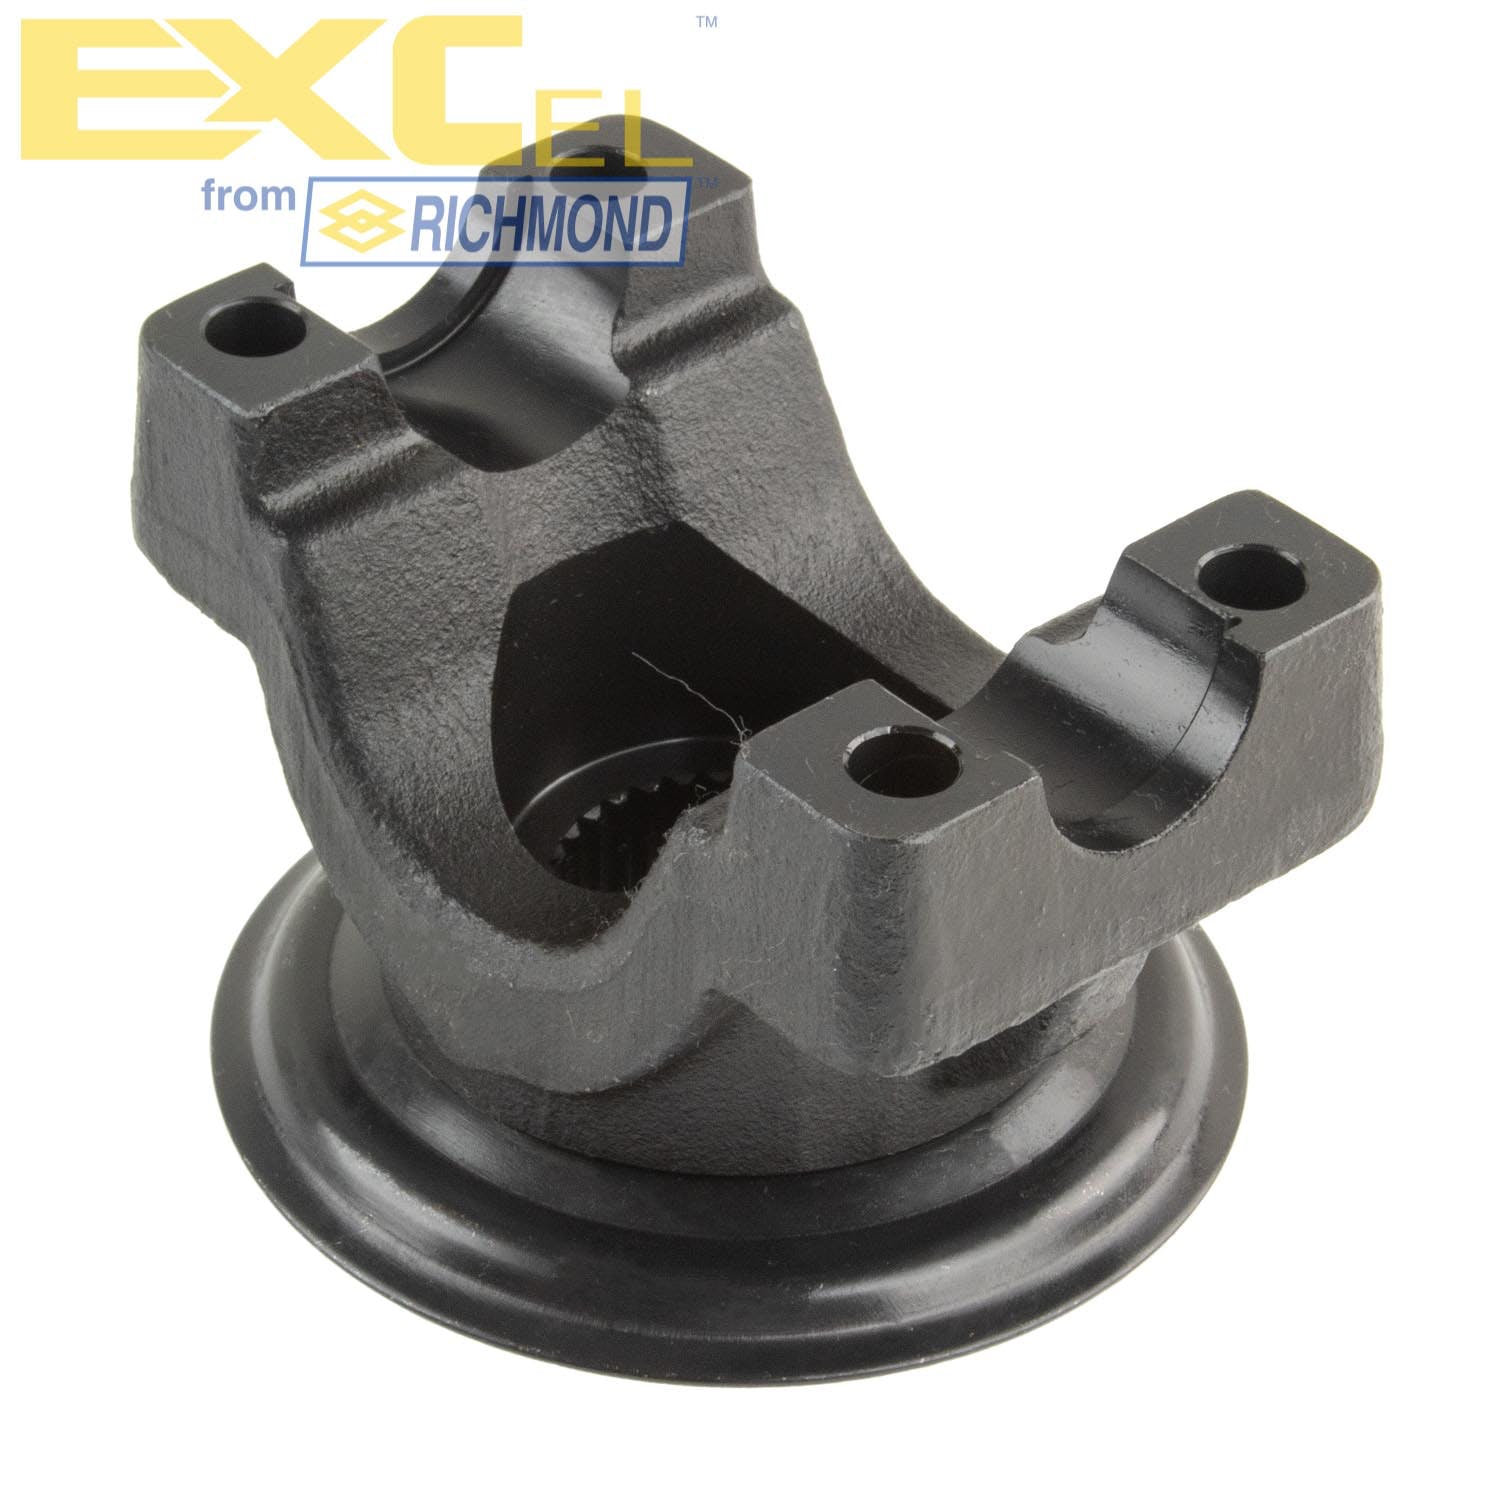 Excel 96-2310 Forged, U-Bolt Style, Dust Shield